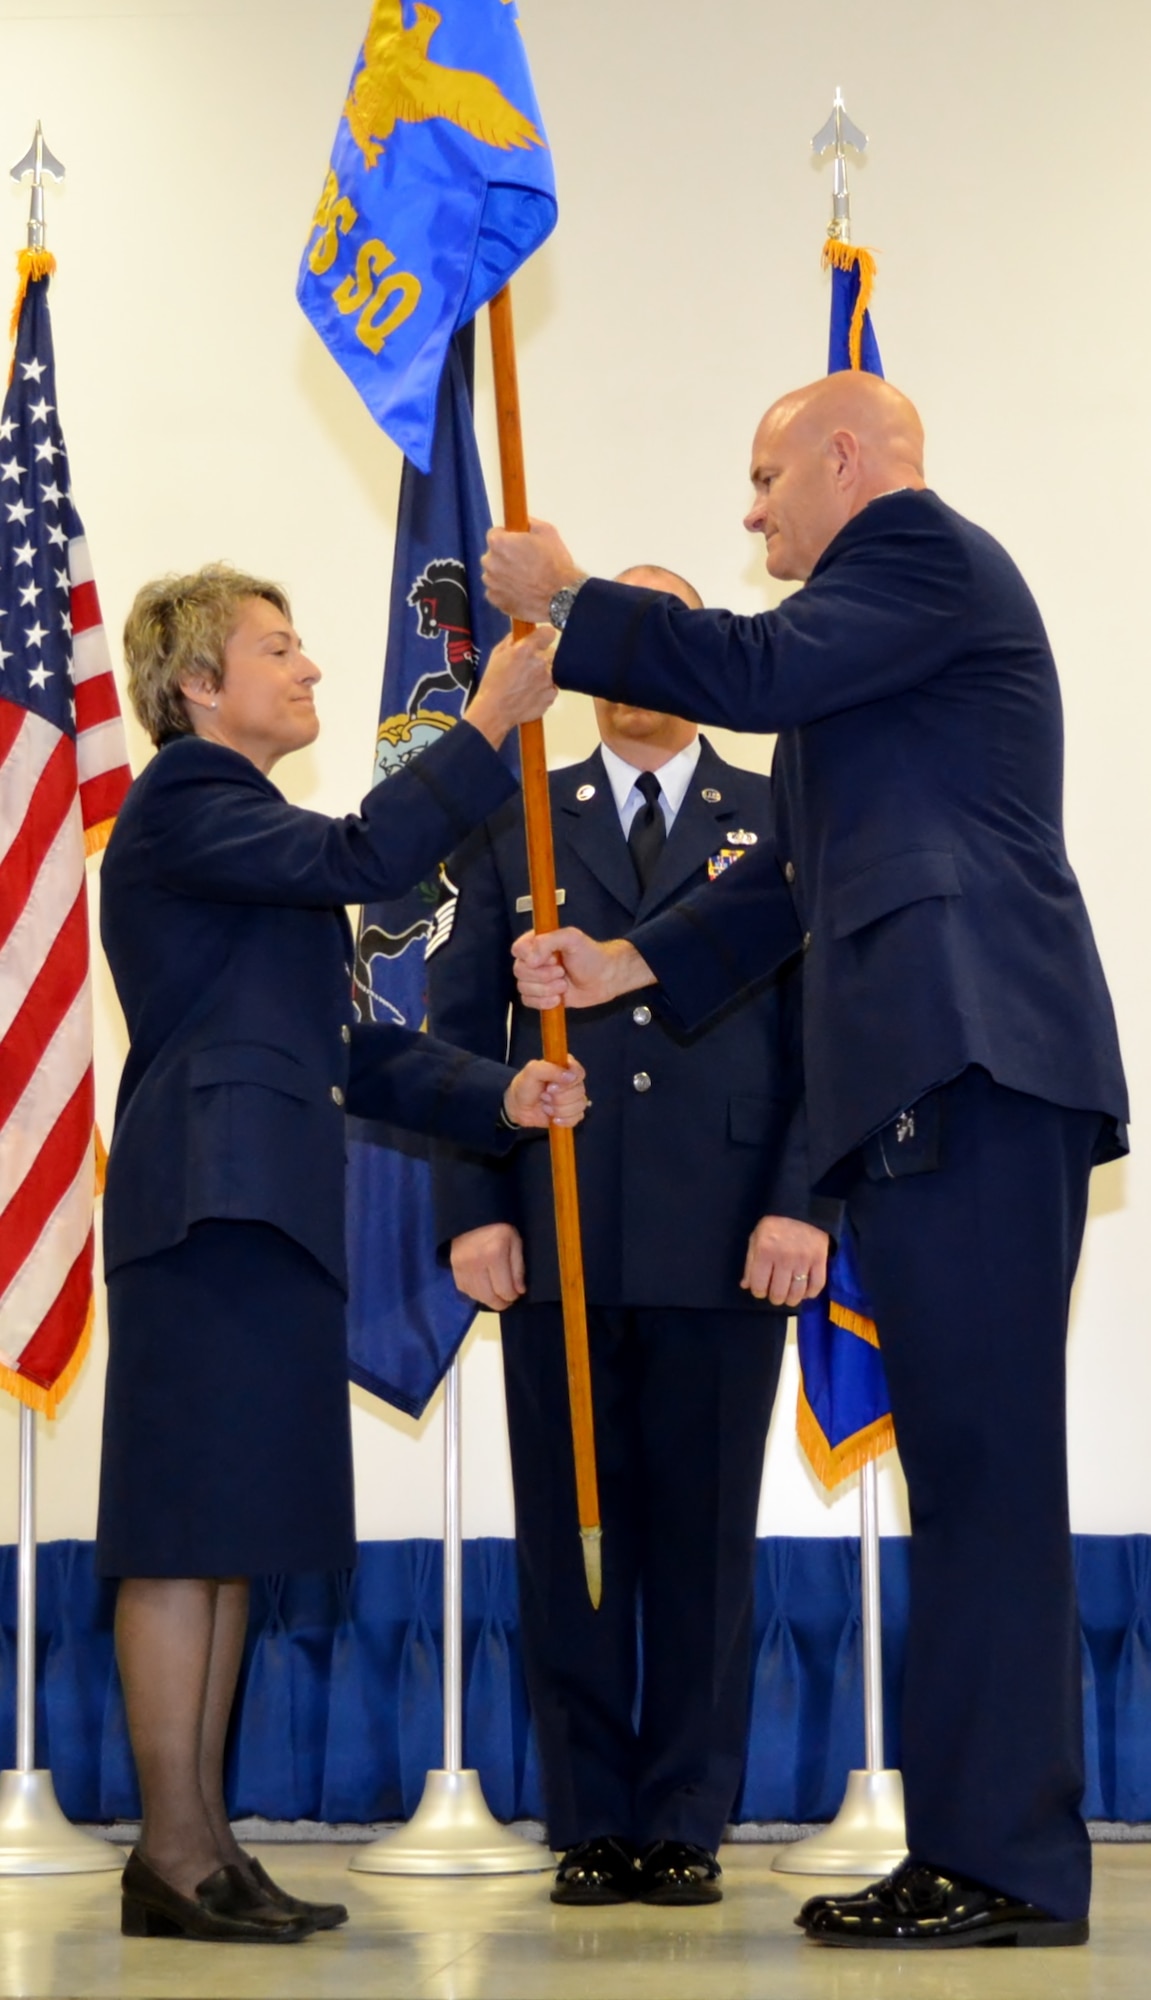 Lt. Col. Claudia Malone, 112th Cyberspace Operations Squadron commander, takes the guidion from Col. Michael Shenk, 111th Operations Group commander, during her assumption of command held at the 111th Attack Wing headquarters building here Sept. 10, 2016. Afterwards, as the first-ever 112th COS commander, she described the evolution of the cyberspace field over the past 50 years, and with a bit of humor, projected where it would be in the future. (U.S. Air National Guard photo by Tech. Sgt. Andria Allmond)